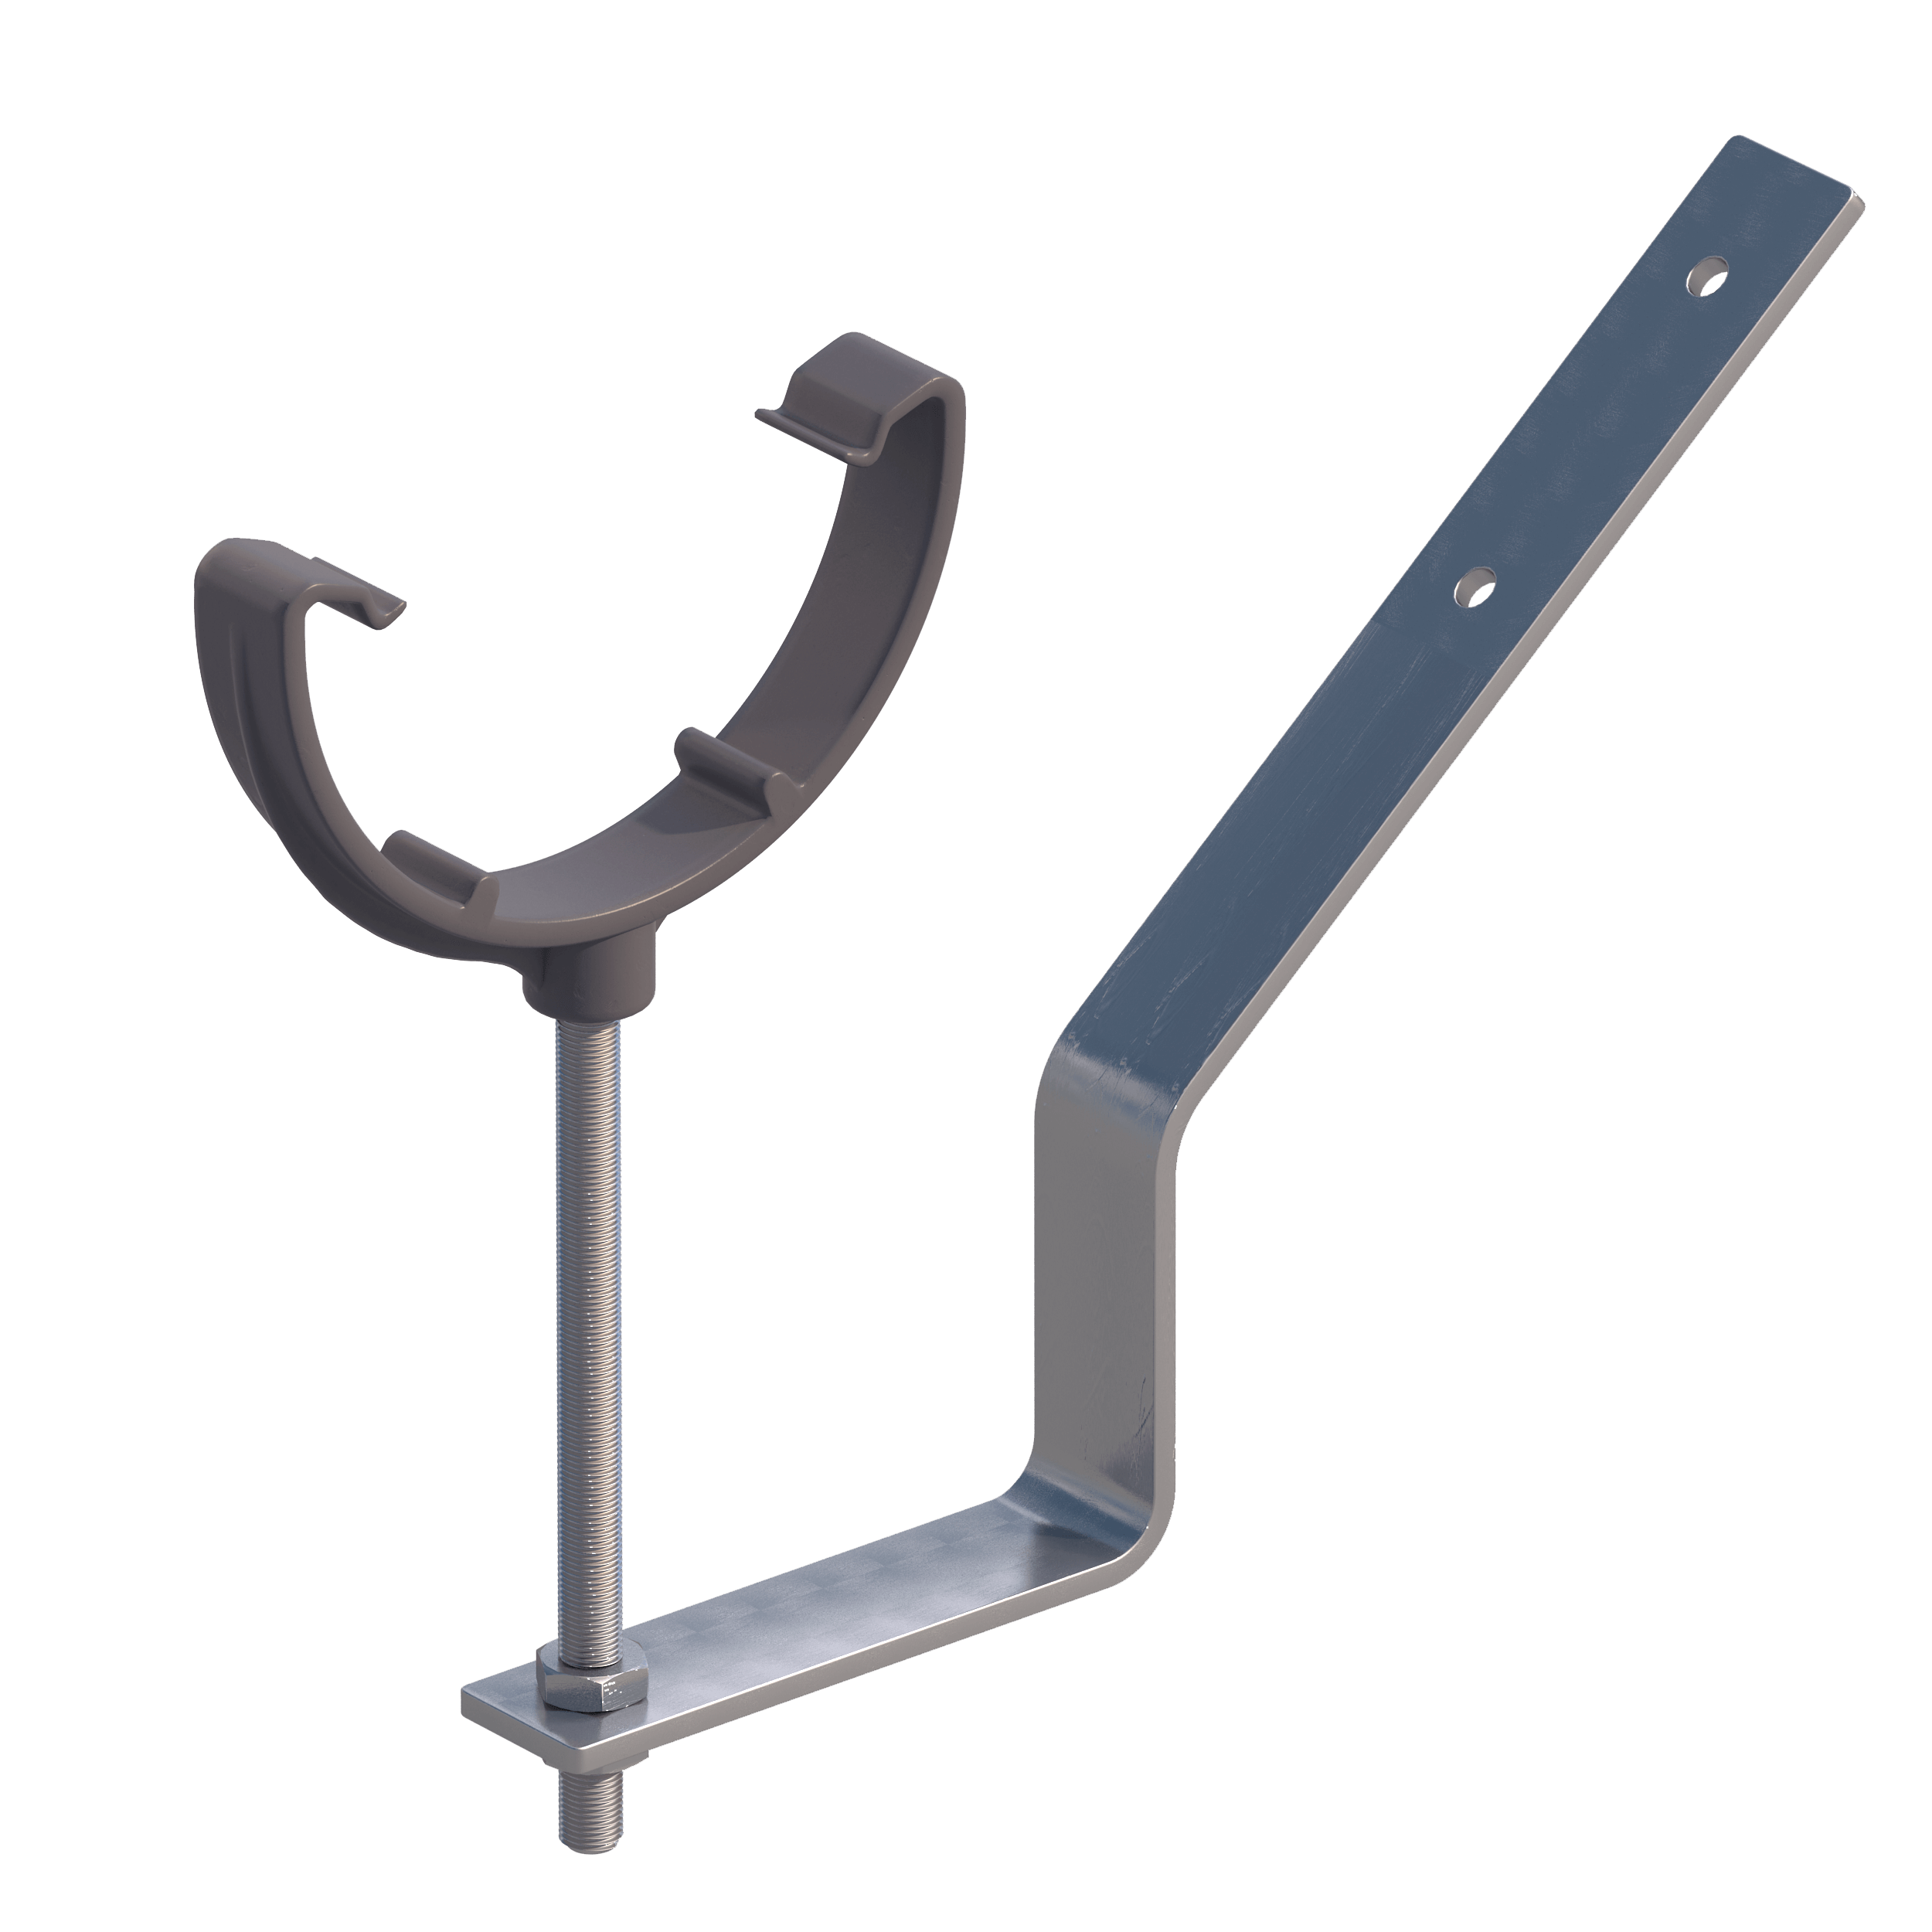 Polypipe RR111 - Half Round 112mm Adjustable Top Rafter Rise and Fall Gutter Bracket